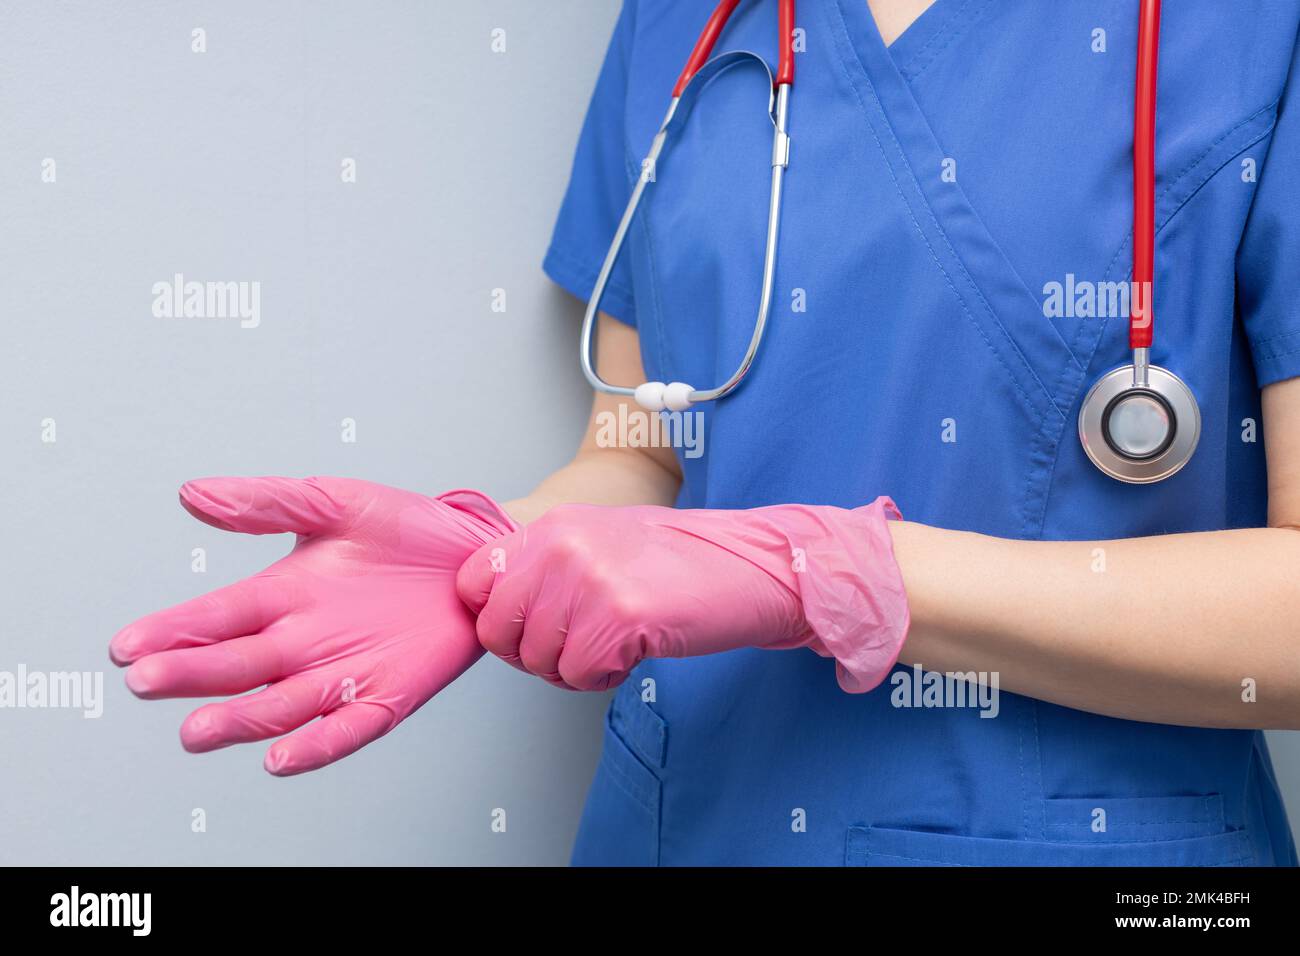 doctor in the hospital puts on a glove. doctor wear gloves. doctor puts on rubber gloves. doctor examining a patient. Stock Photo